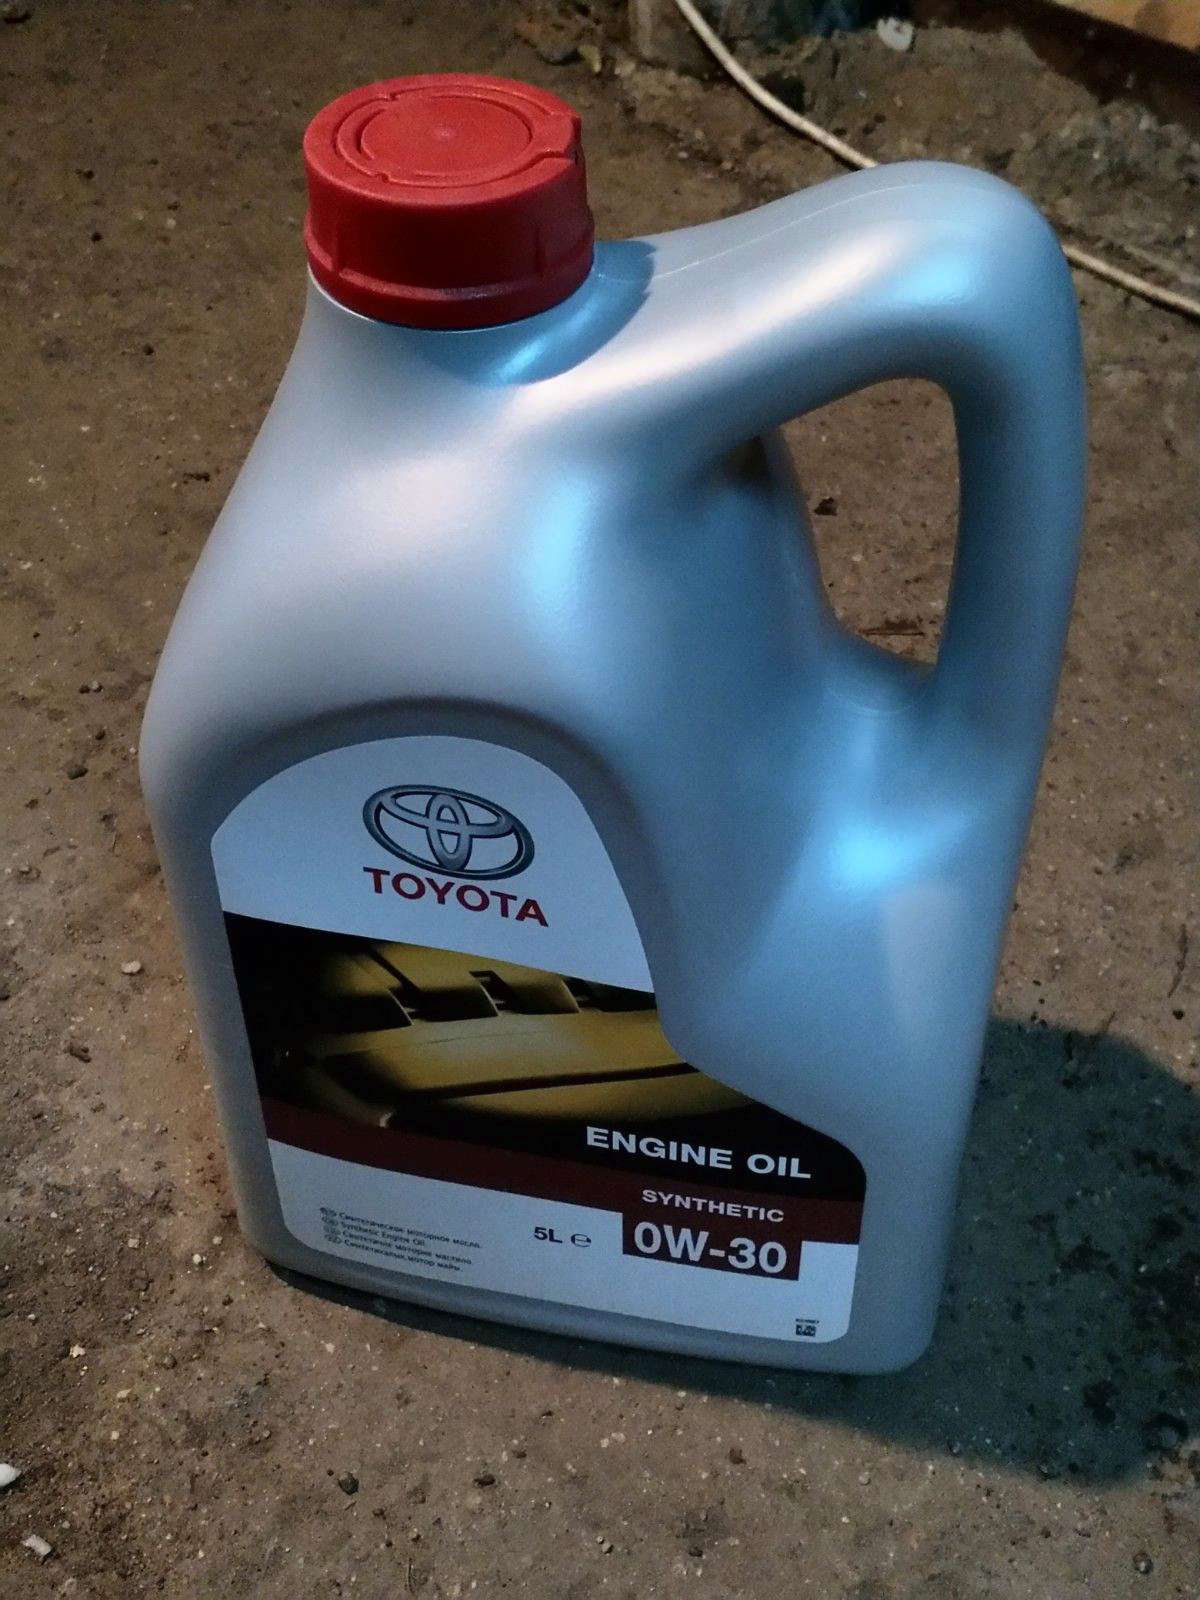 Масло тойота раум. Toyota engine Oil 0w-30, 5л. Масло Toyota 0w30 5л артикул. Toyota engine Oil 0w30 08880-80365-go 5л. 08880-80365-Go.